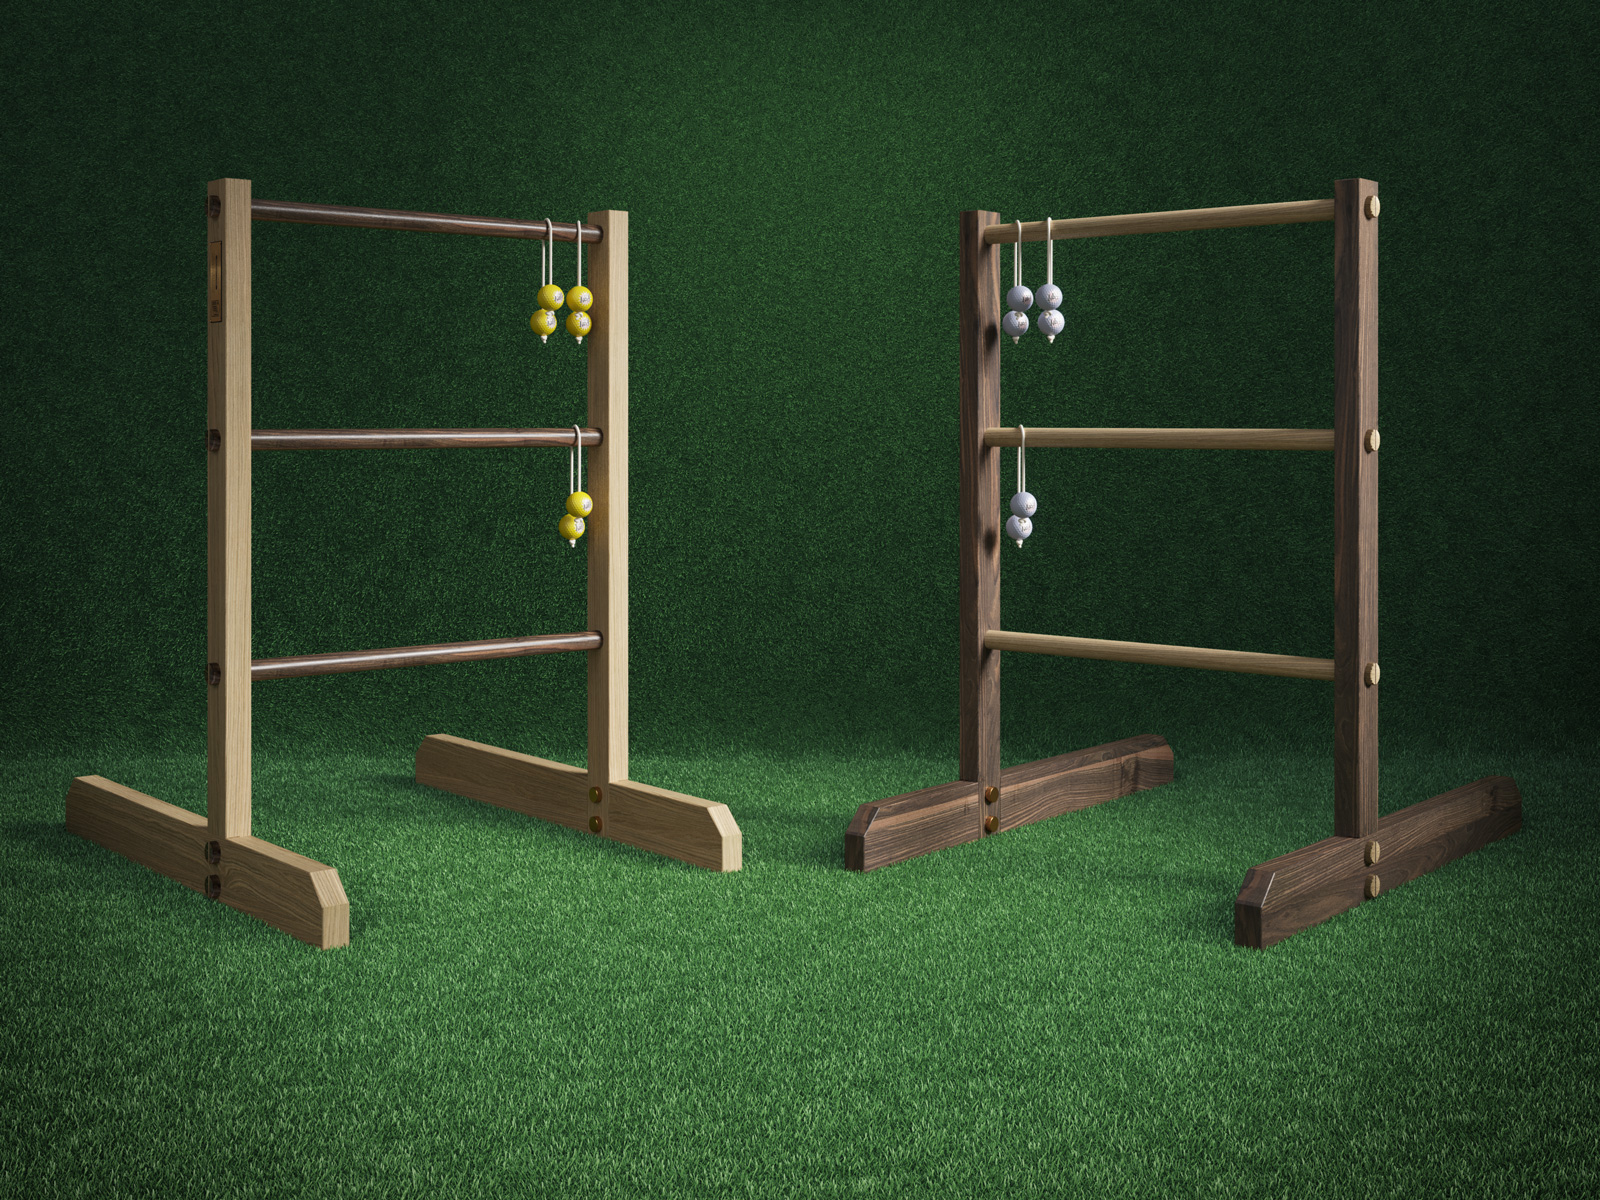 A set of gaming of equipment for the game ladders, made of rich dark and light wood, set against a green turf background.